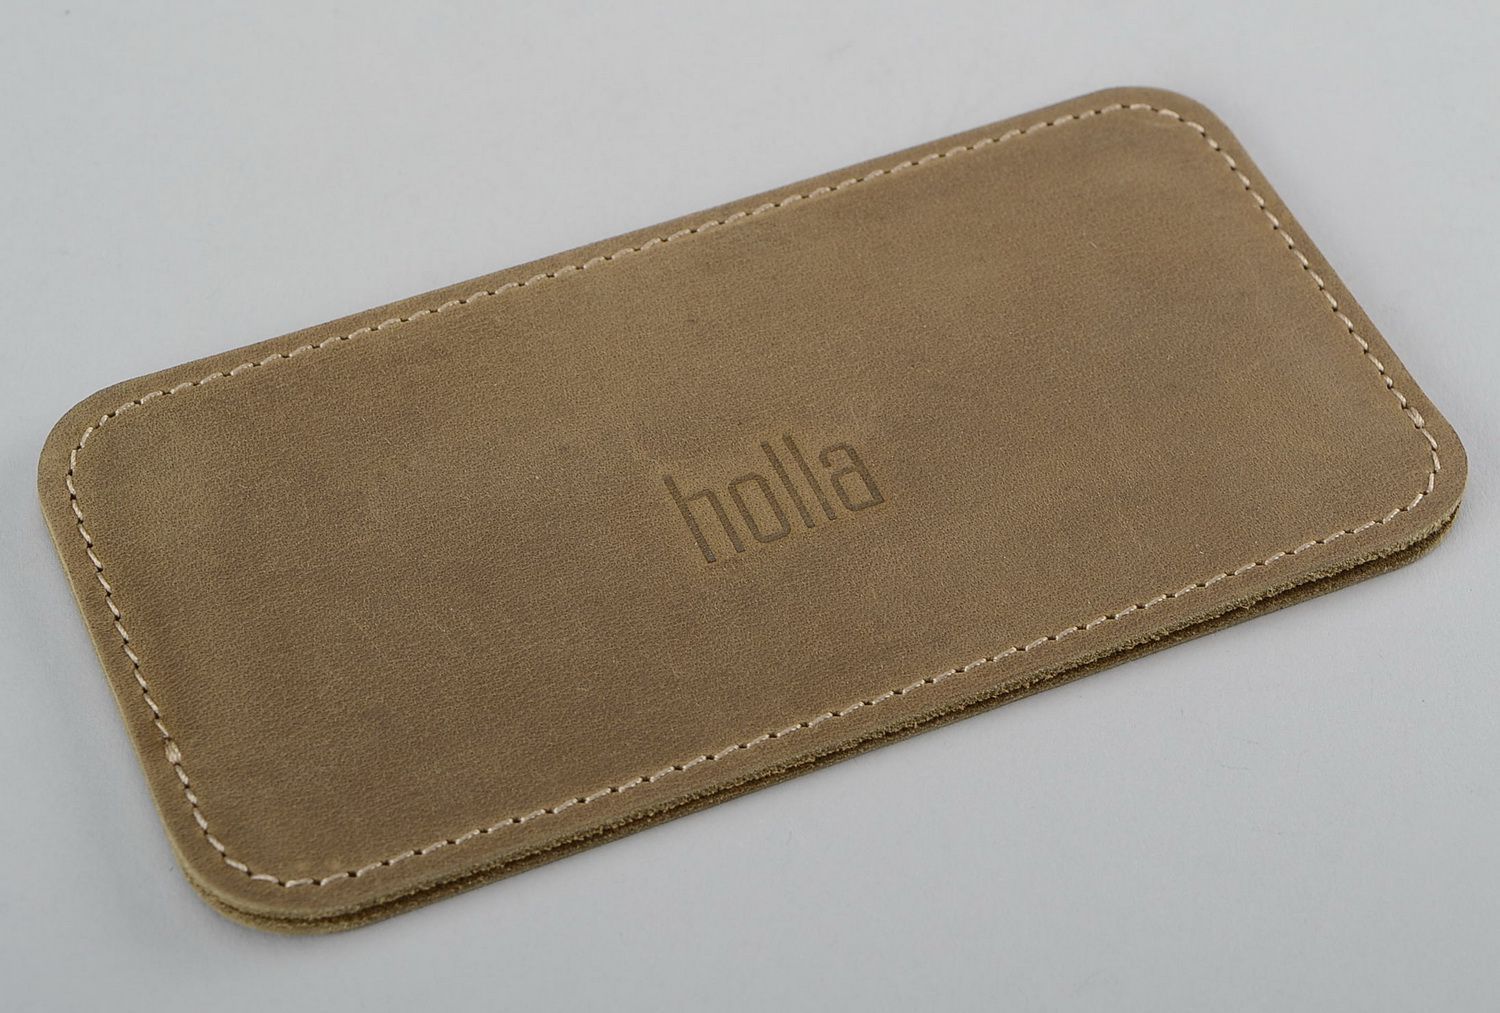 Sleeve for iPhone 4S/5S made of natural leather photo 1